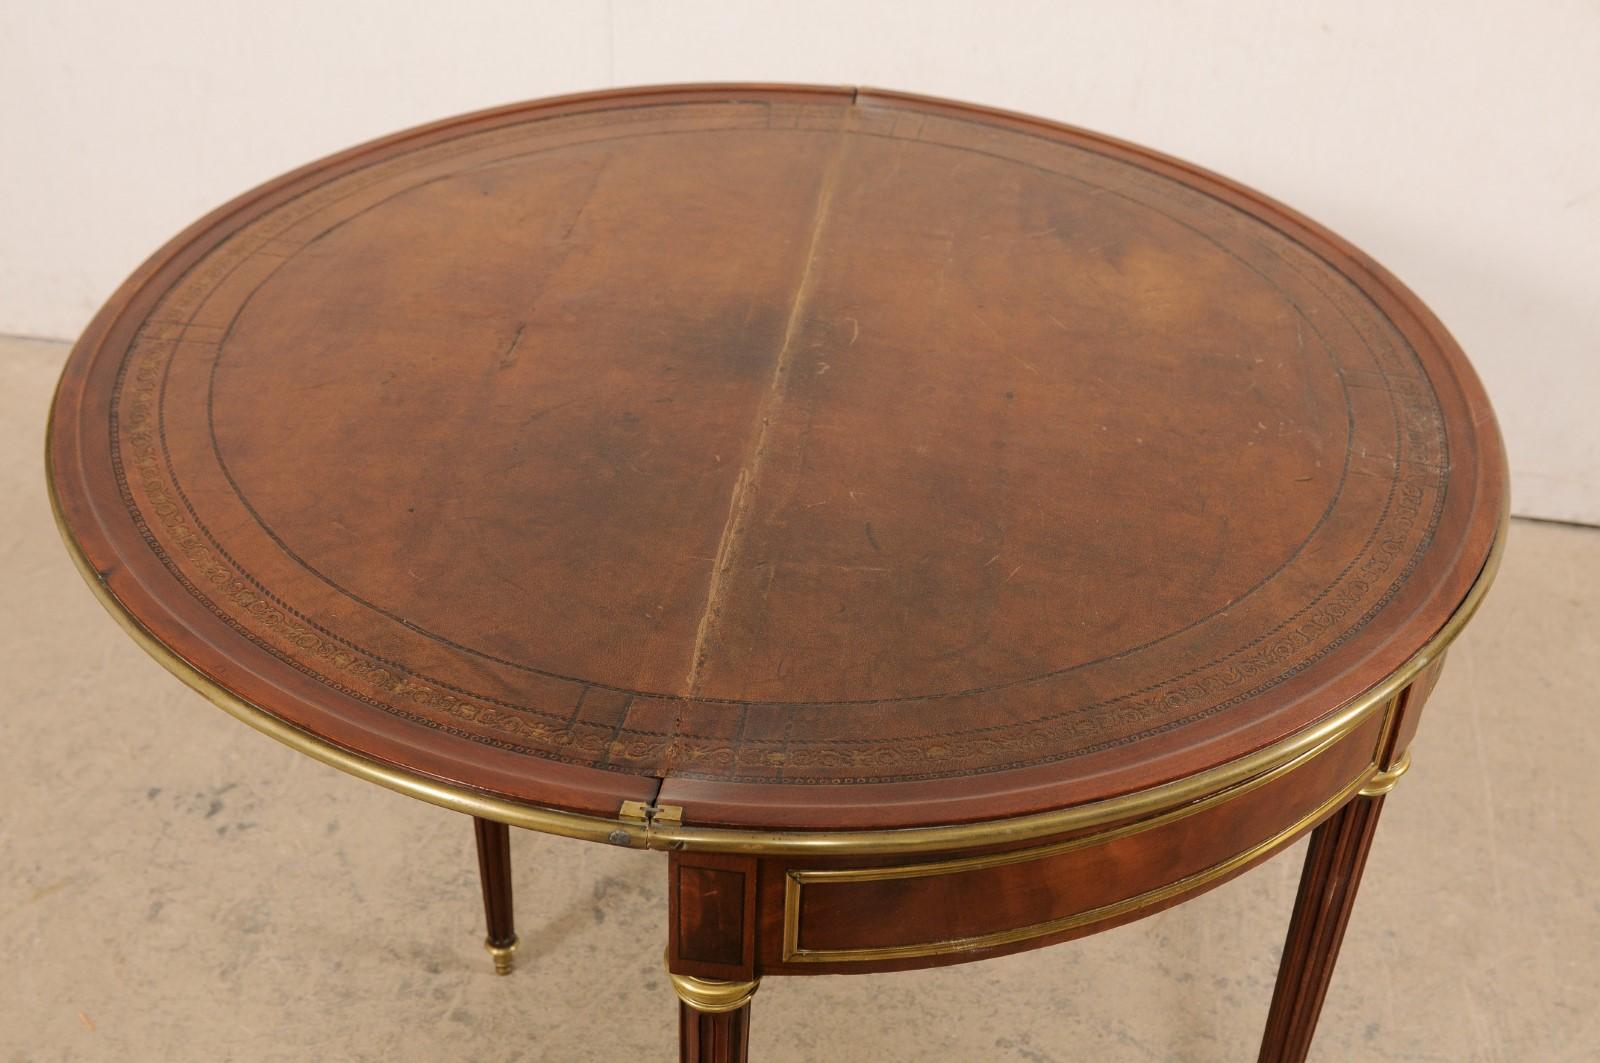  Elegant French Neoclassical Demi-to-round Table W/ Brass Accents, 19th C.  6